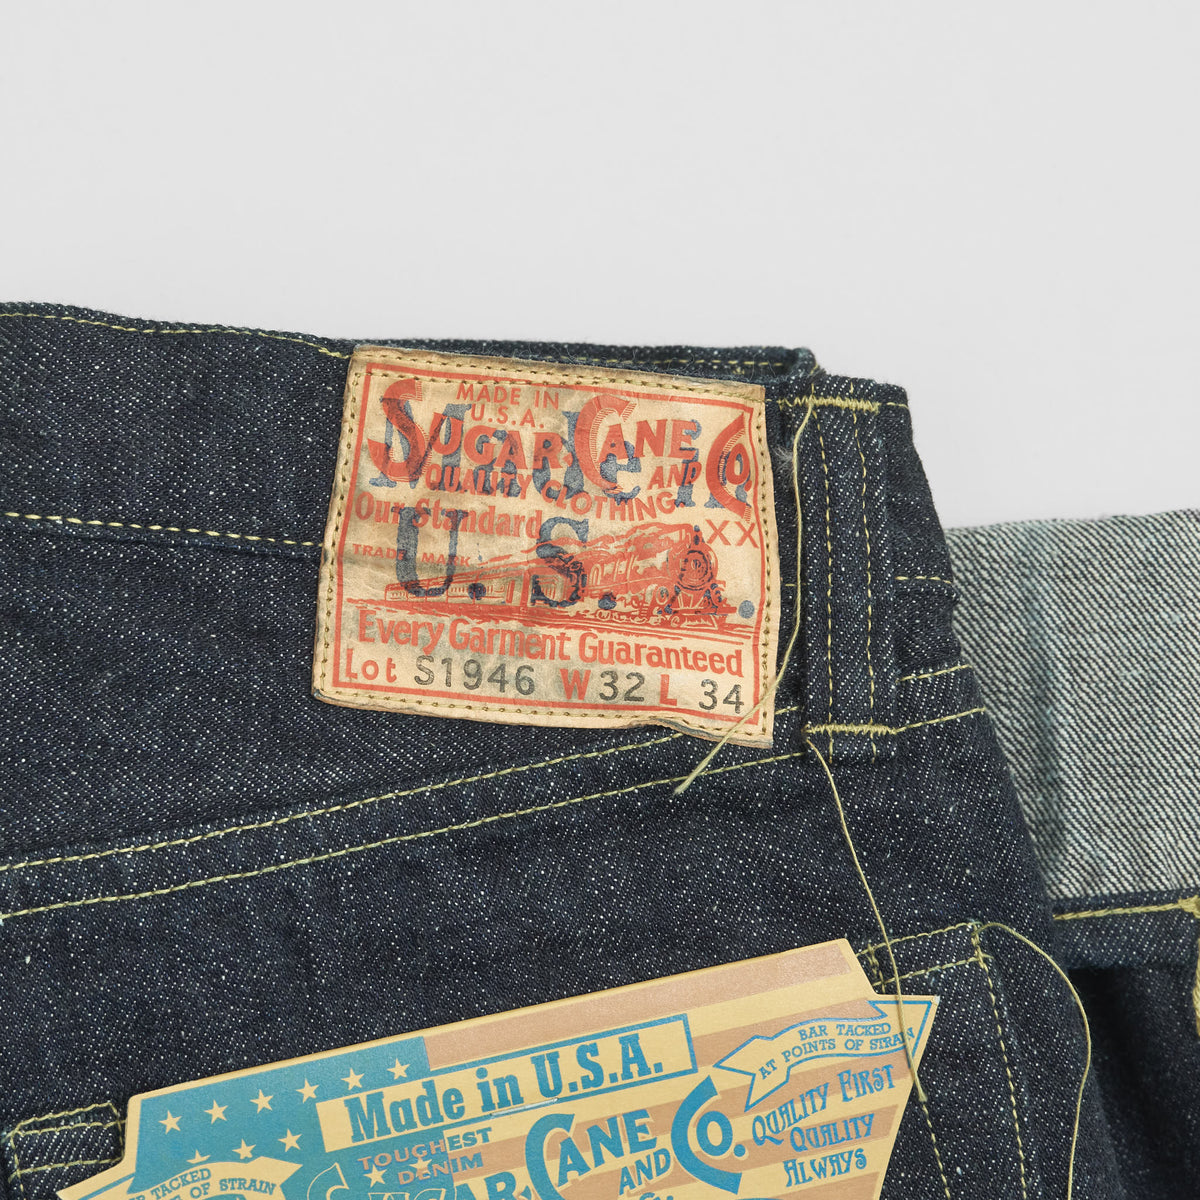 Sugar Cane Denim Jeans Made in USA 1946 Reproduction